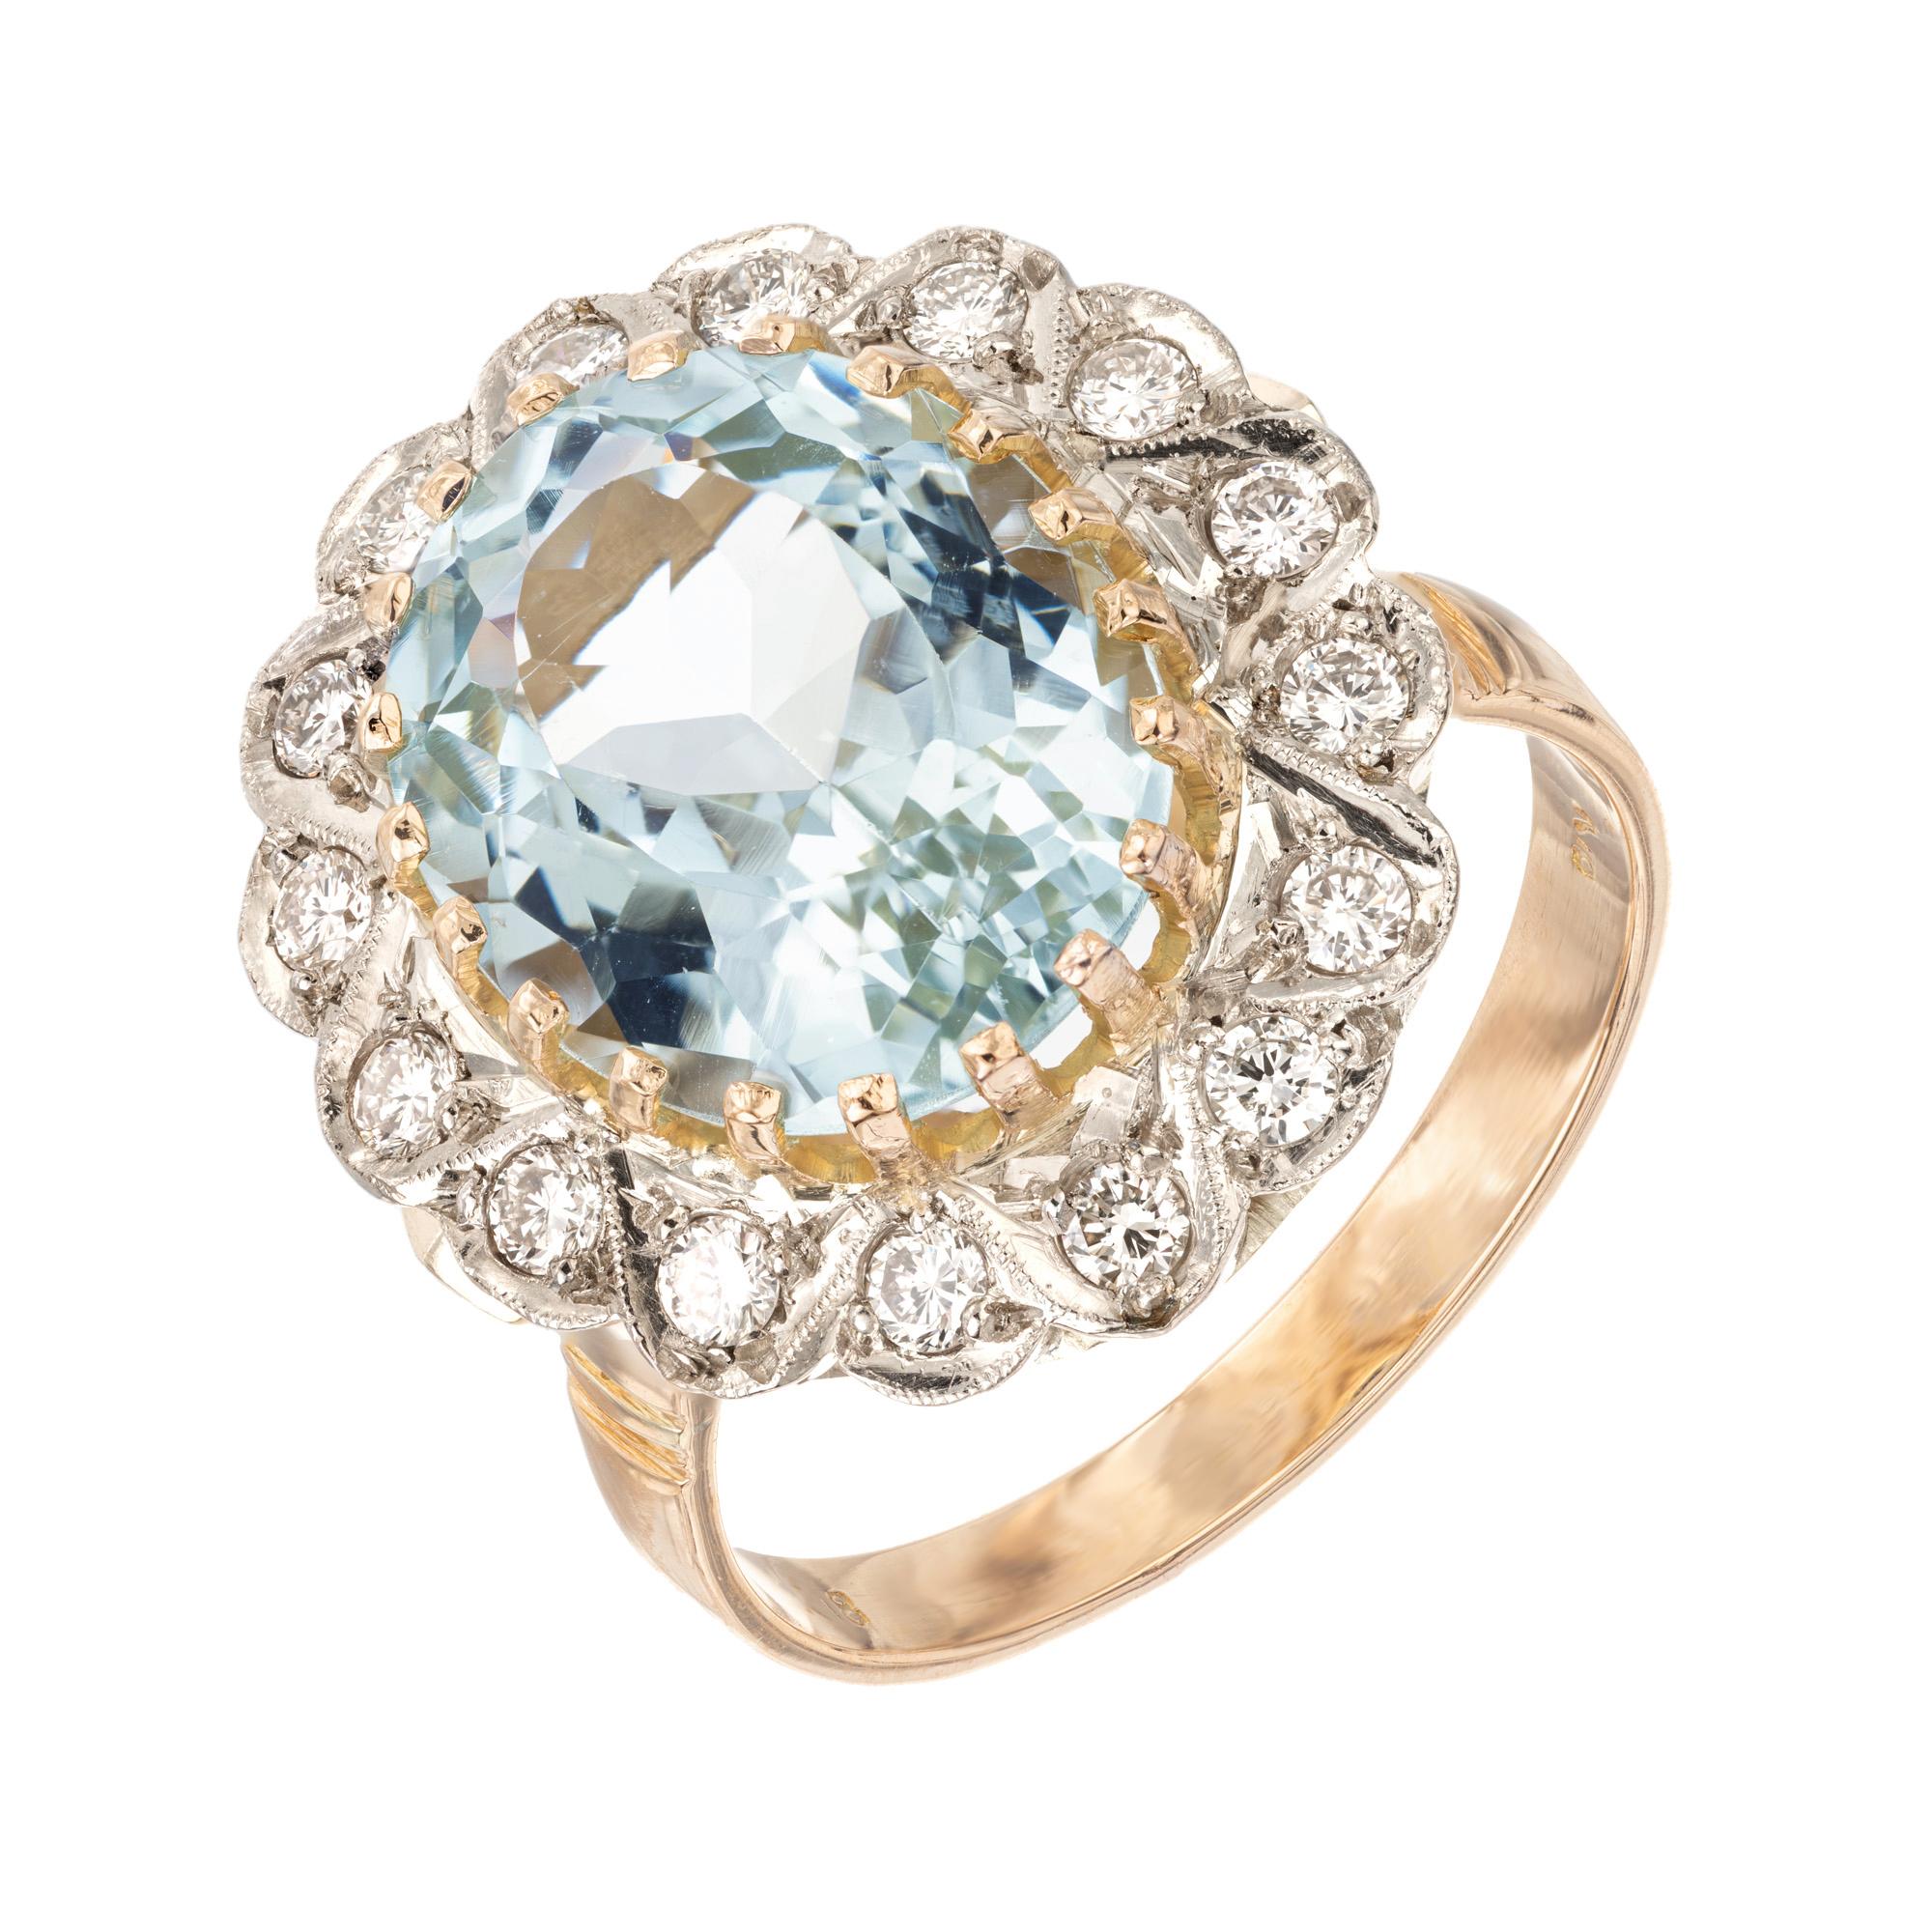 Crafted to captivate, this 1950's aquamarine and diamond tri tone gold cocktail ring is a true showstopper. 5.00 carat aqua is mounted in a 18k yellow, white and rose gold setting. Accented by a halo of 16 round brilliant cut dazzling diamonds. The